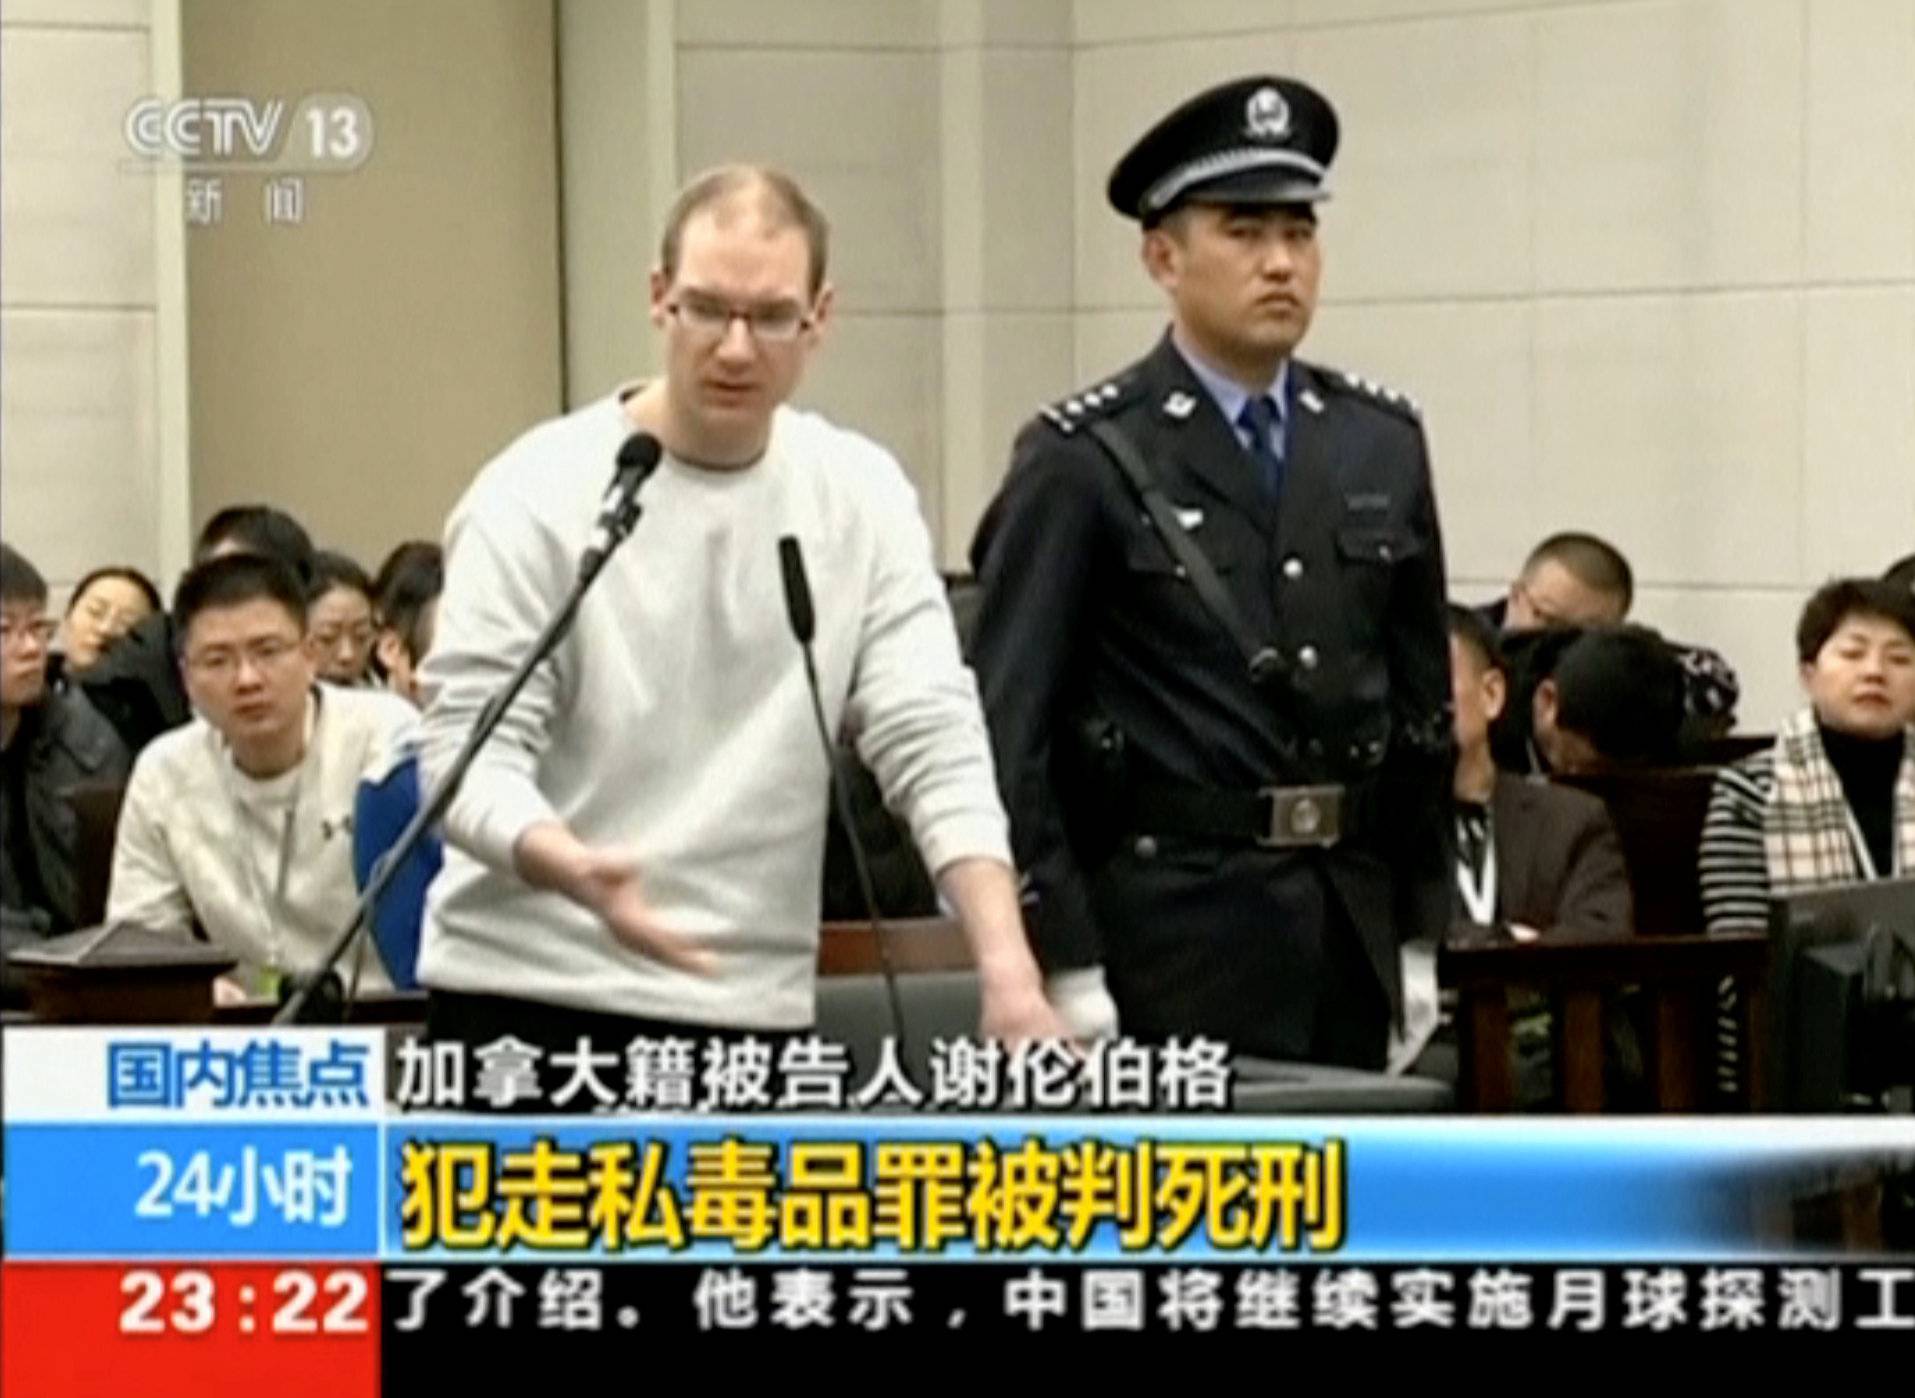 A still image taken from CCTV video shows Canadian Robert Lloyd Schellenberg in court, where he was sentenced with a death penalty for drug smuggling, in Dalian